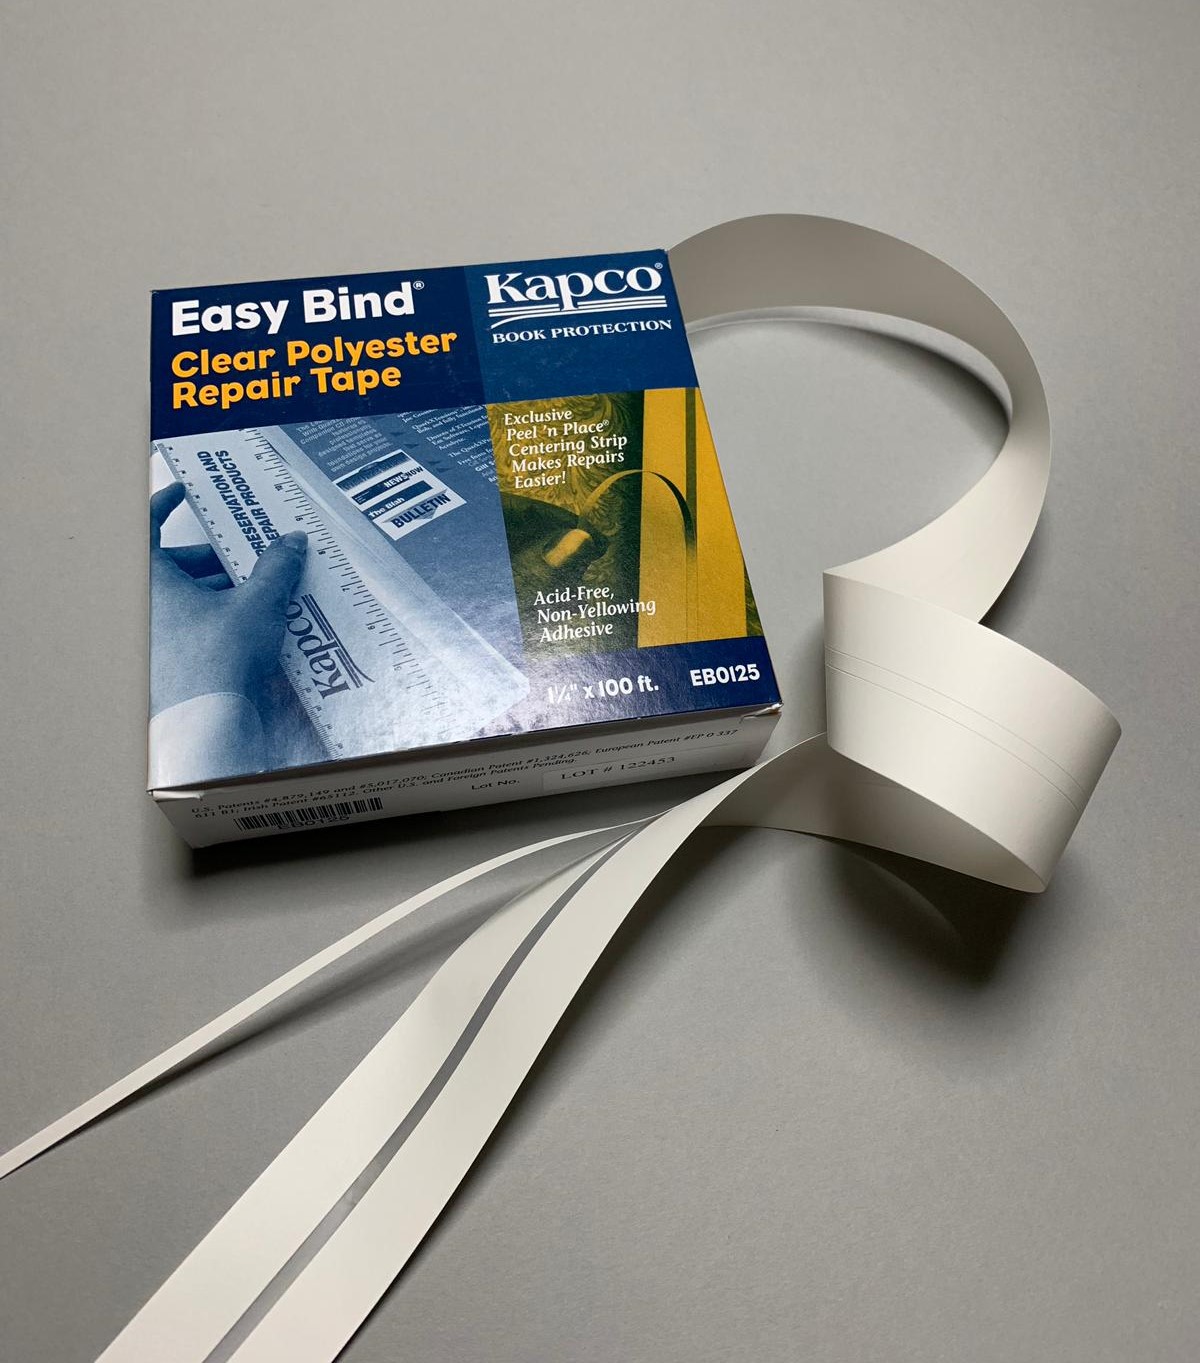 KAPCO 611553356140 Book Protection Easy Bind Repair Tape Peel and Place Polyester Gossy 